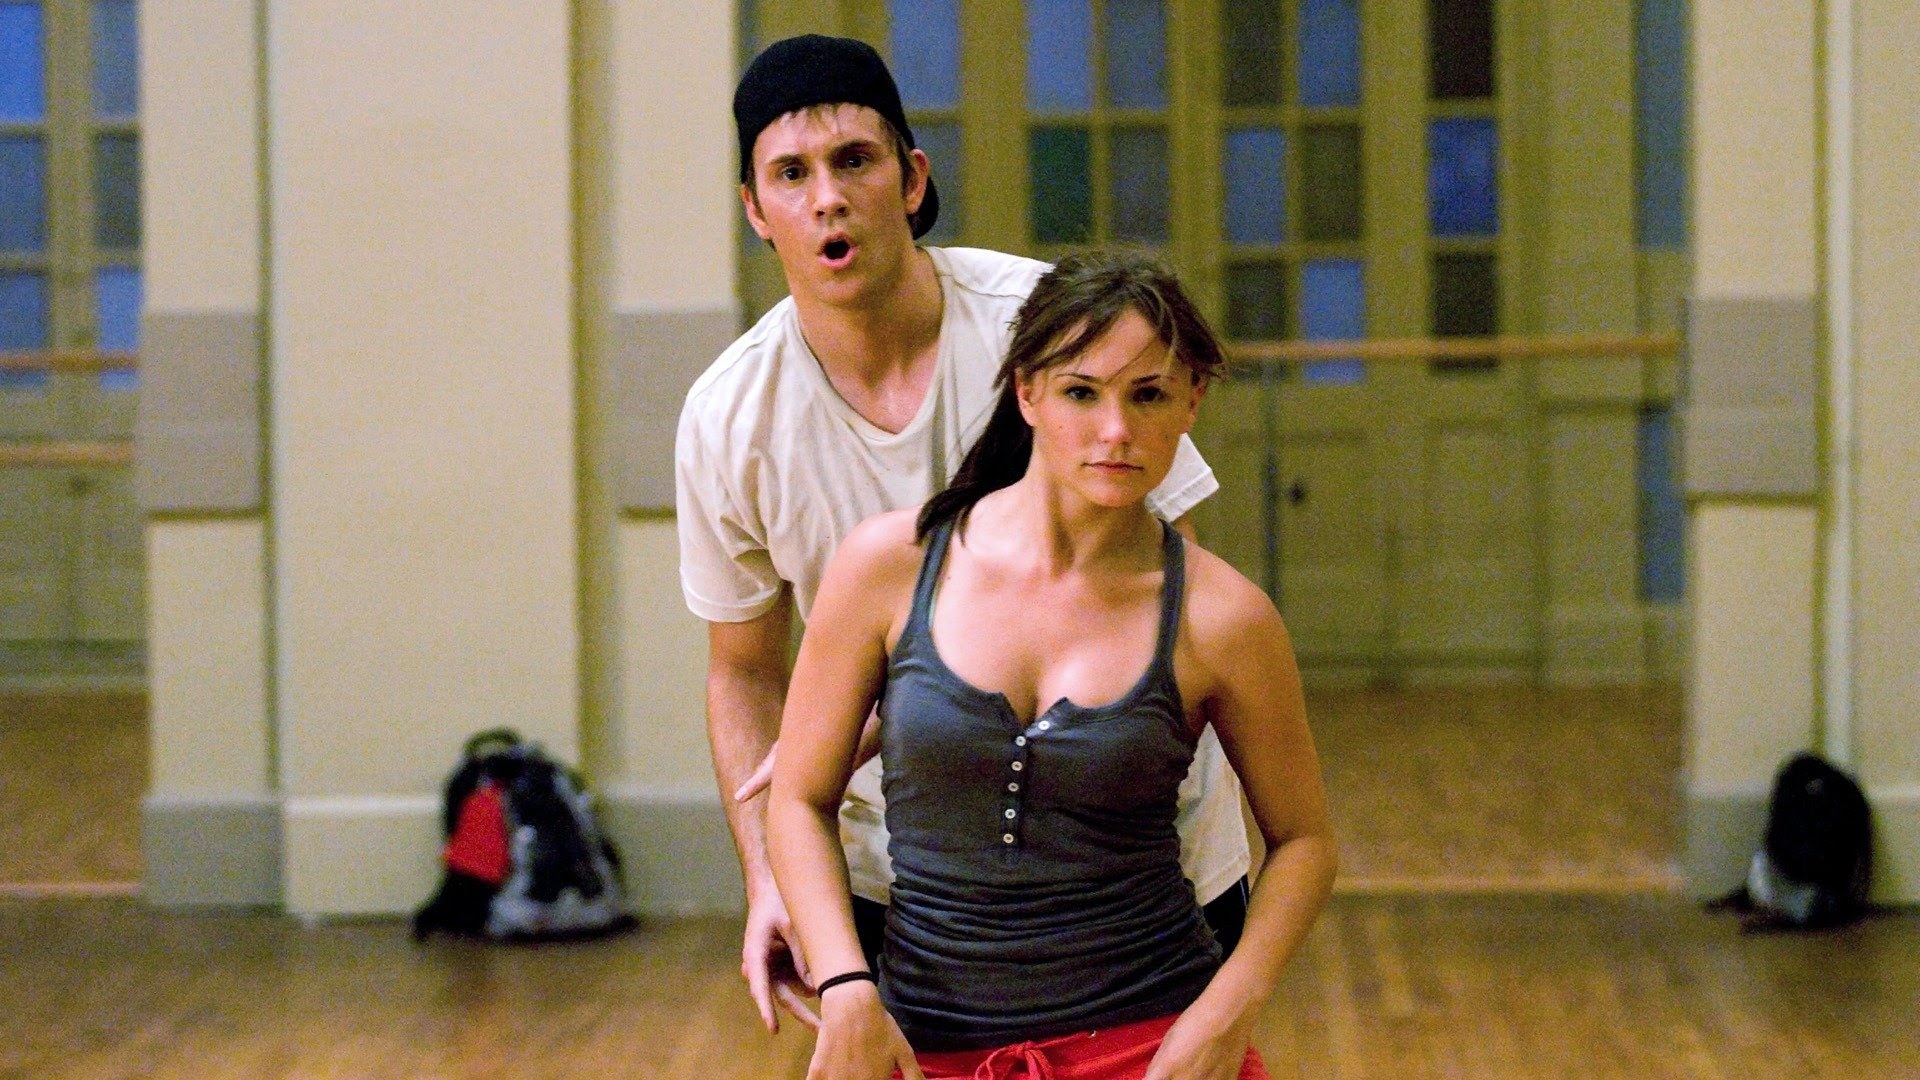 Step Up 2 The Streets - Movies on Google Play